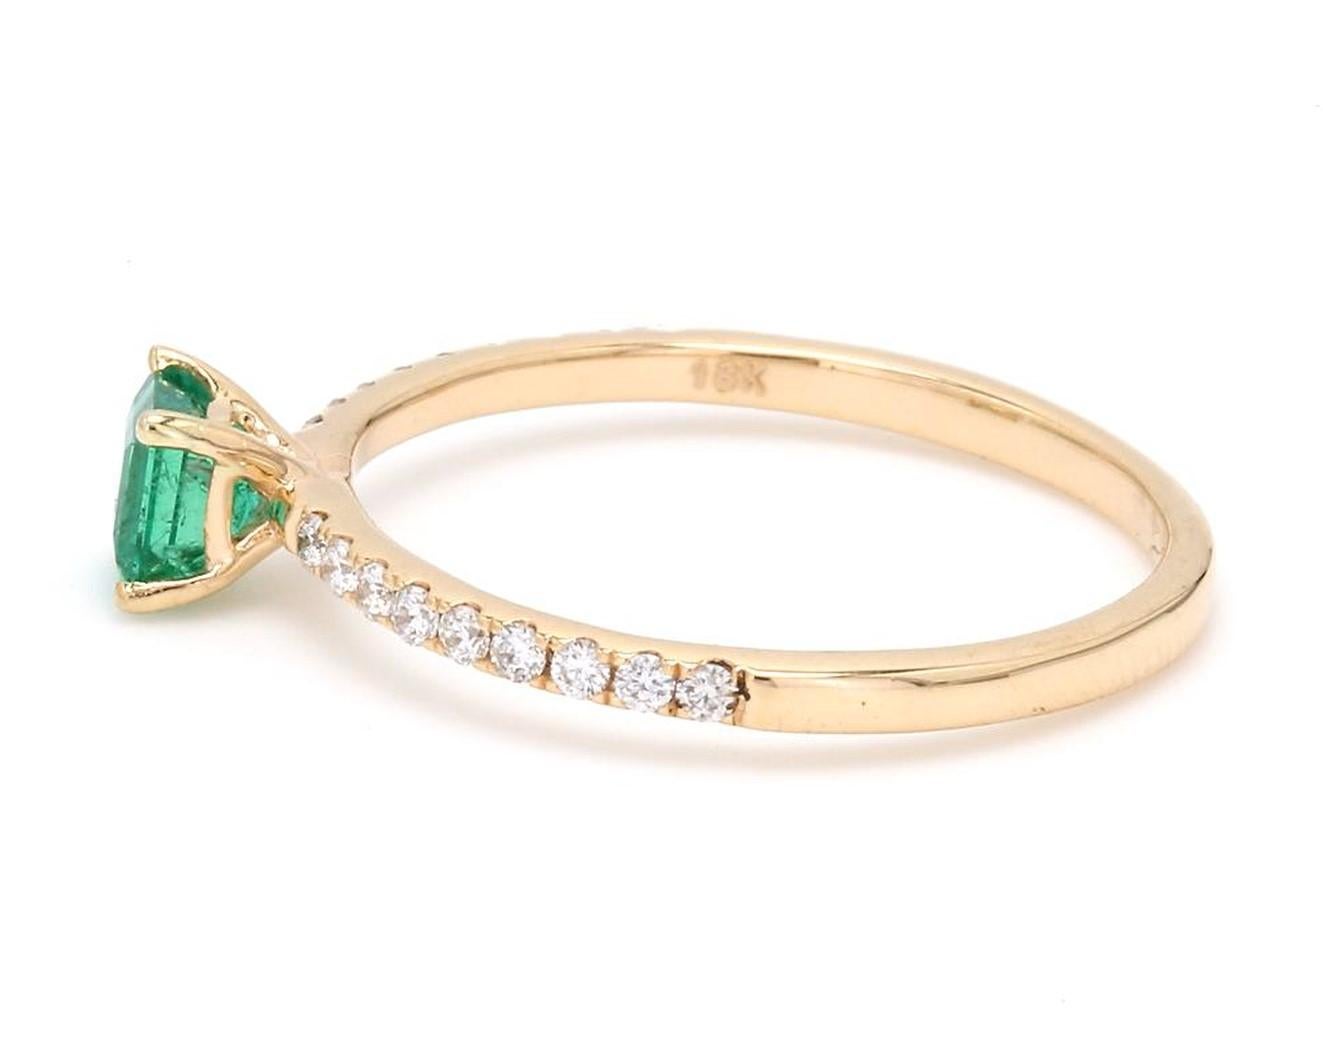 A Beautiful Handcrafted Ring in 18 Karat Yellow Gold  with Natural Emerald in Square Cut and Diamonds on Shank. A perfect Ring for occasion

 Emerald Details
Pieces : 1 Pieces Square Cut 
Weight : 0.32 Carat 
AAA Quality Emerald

Natural Diamond